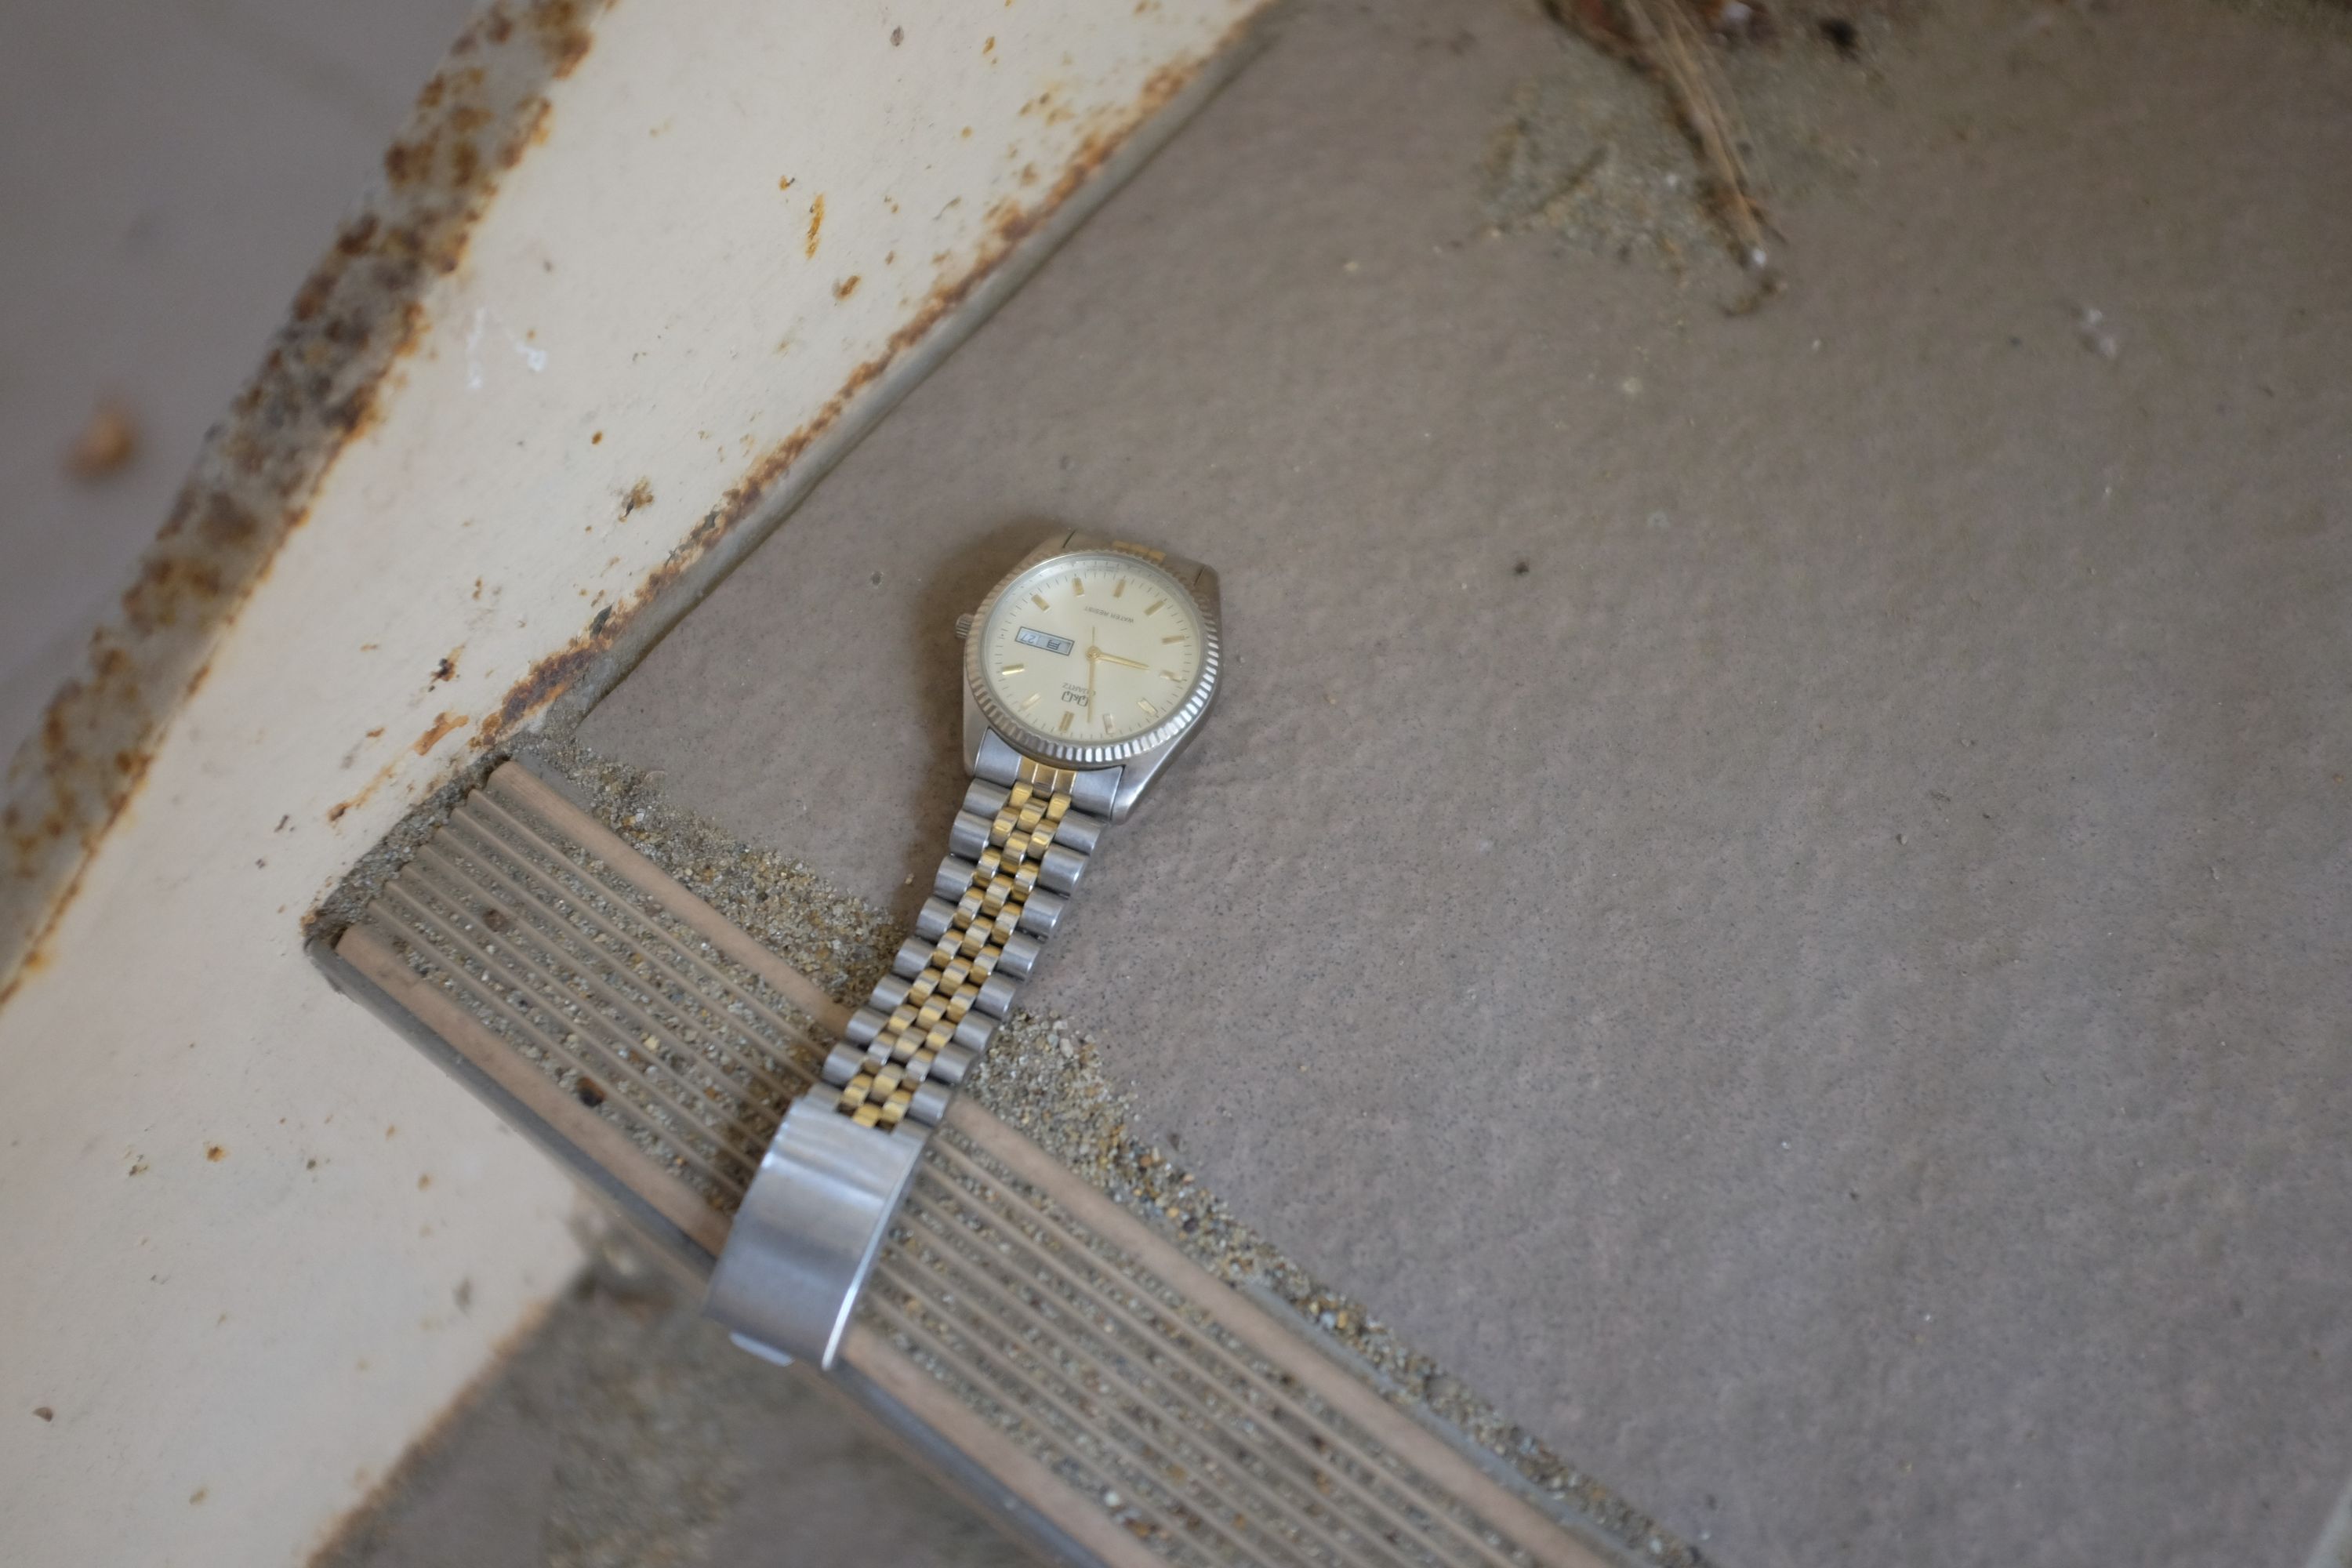 An abandoned metal wristwatch on the stairs.